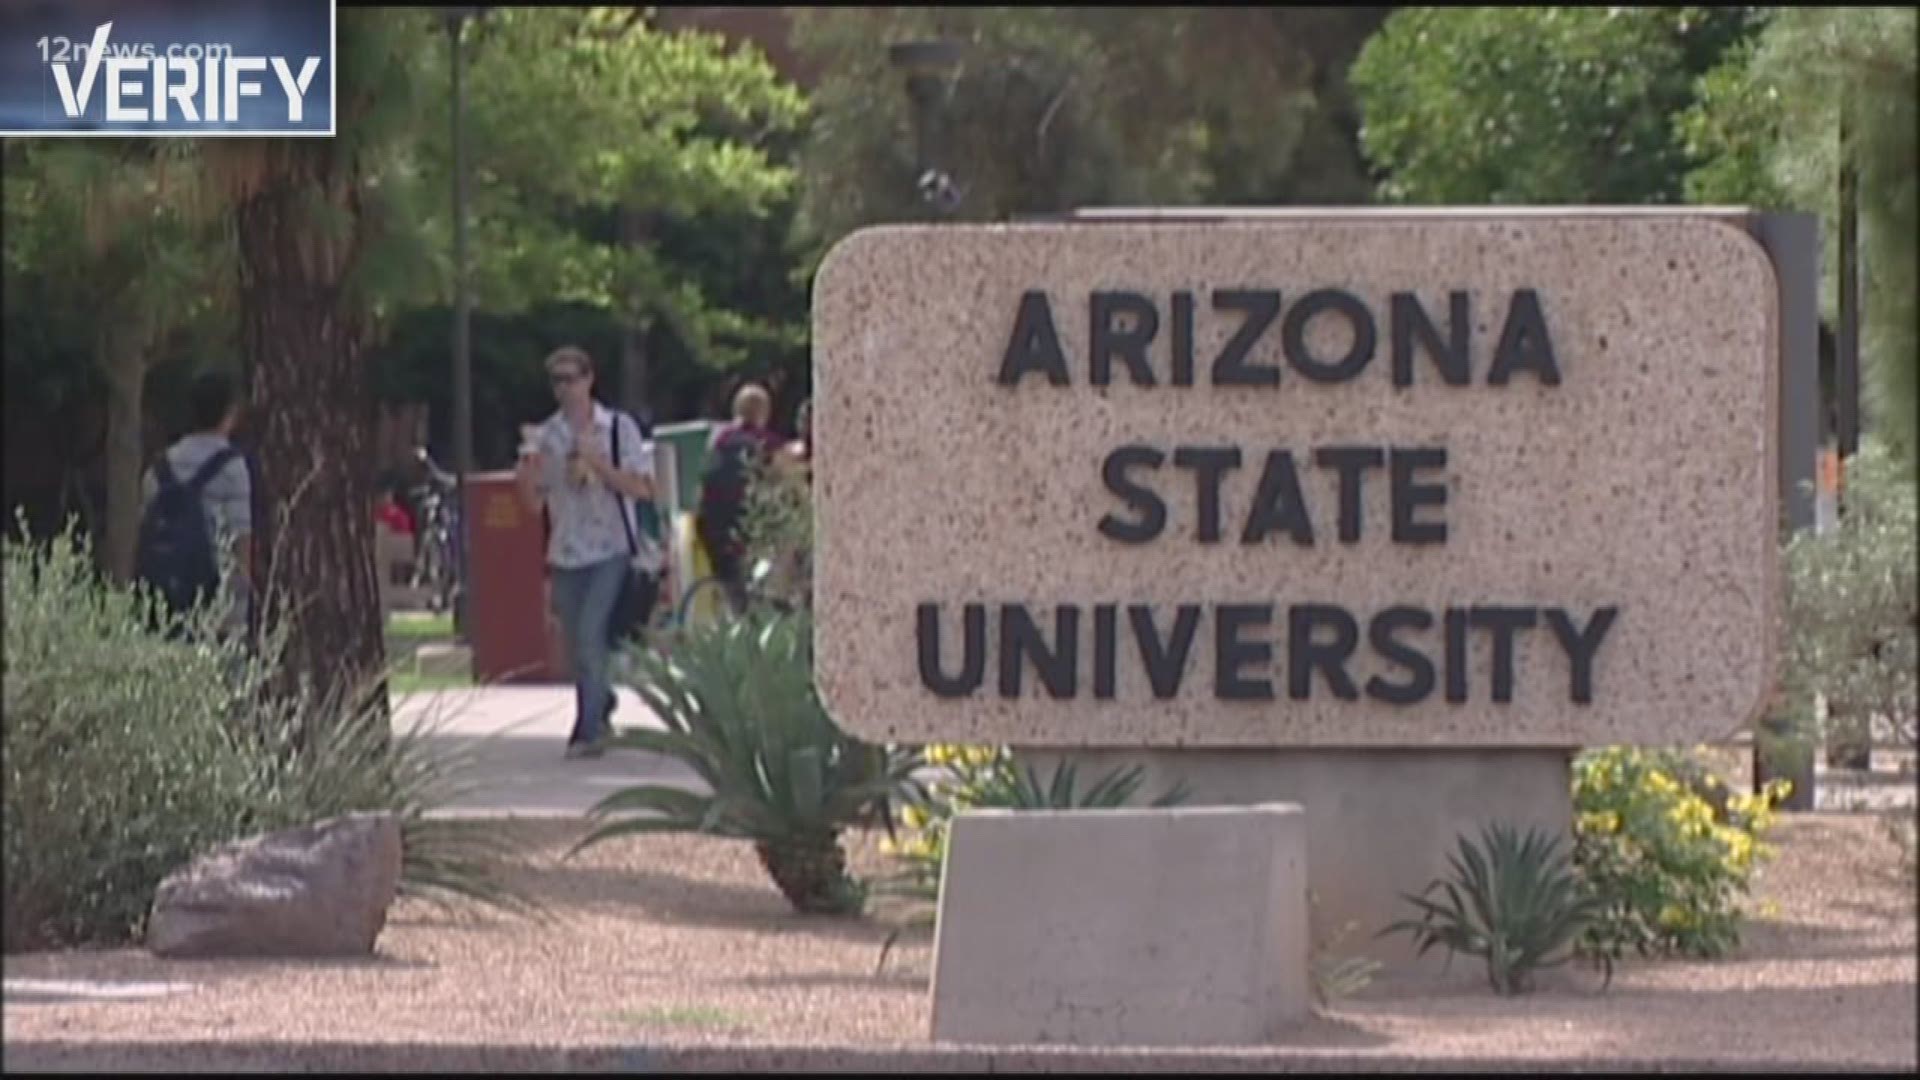 The Trump administration is rolling back Obama era rules on affirmative action. We take a look at what impact the roll backs will have on Arizona universities.